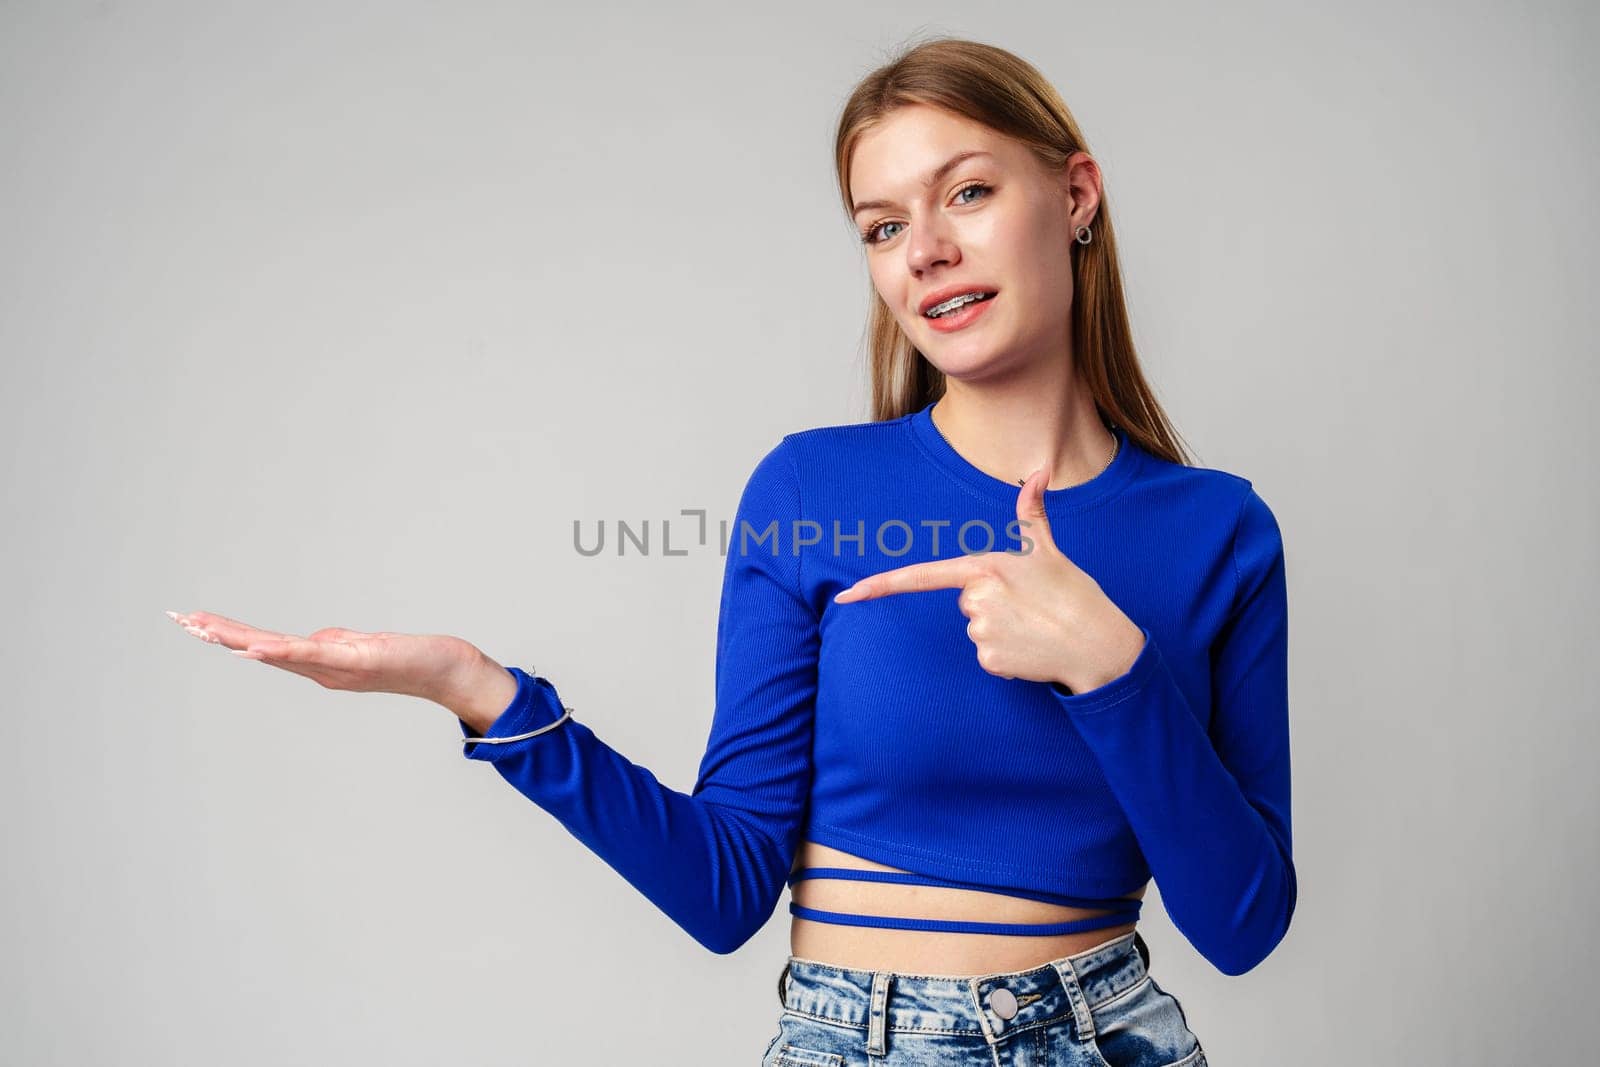 Woman in Blue Top Pointing With Hand Against Neutral Background in studio